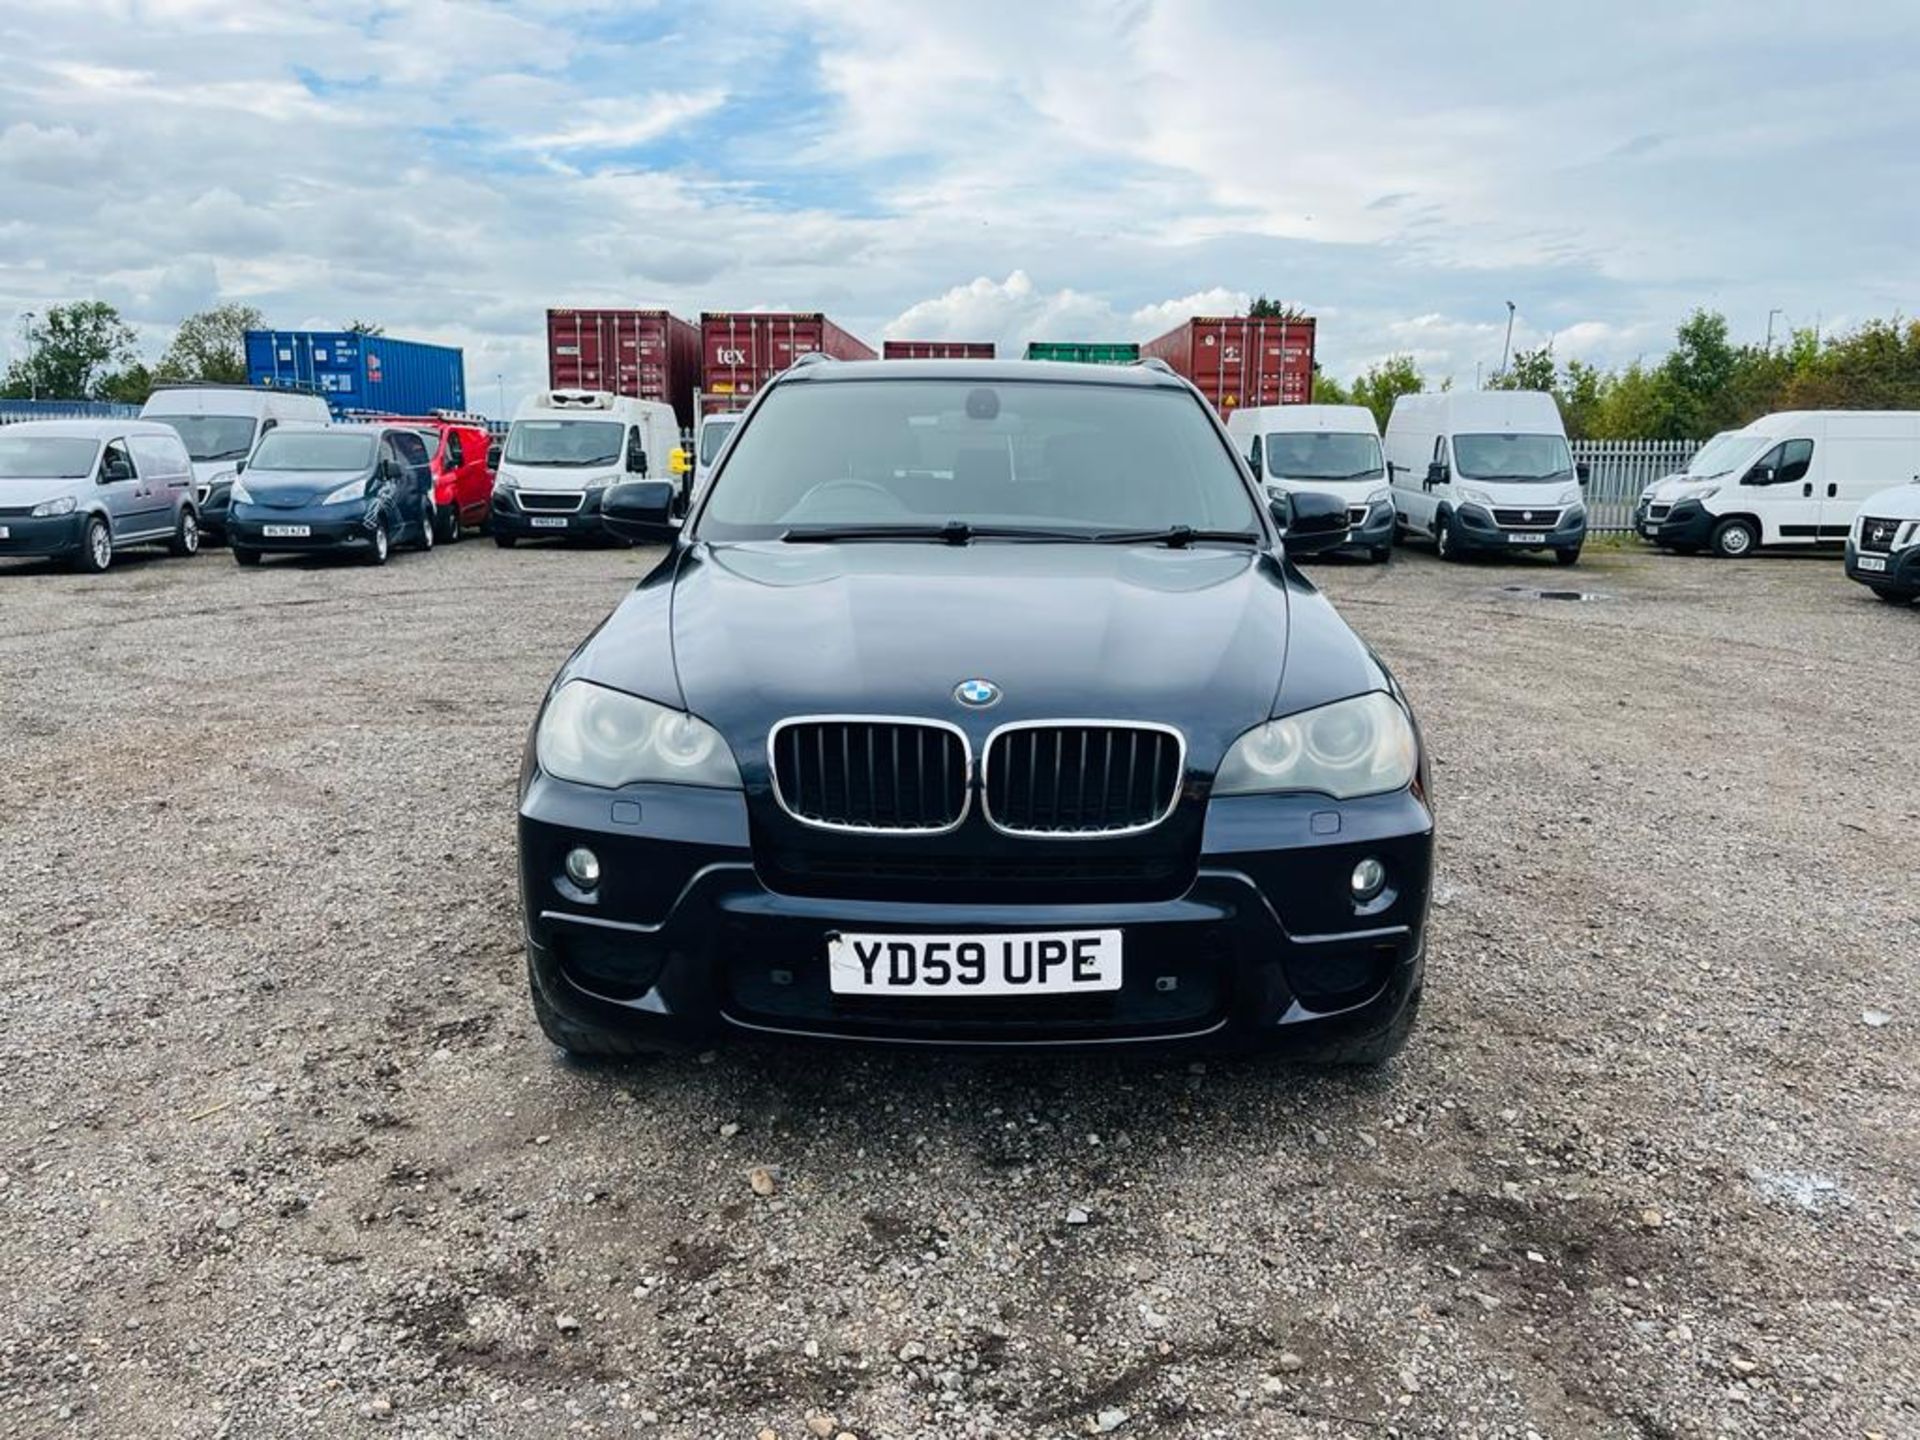 ** ON SALE ** BMW X5 XDrive MSport 30D A 3.0 2009 "59 Reg" - Automatic - Air Conditioning - Image 2 of 30